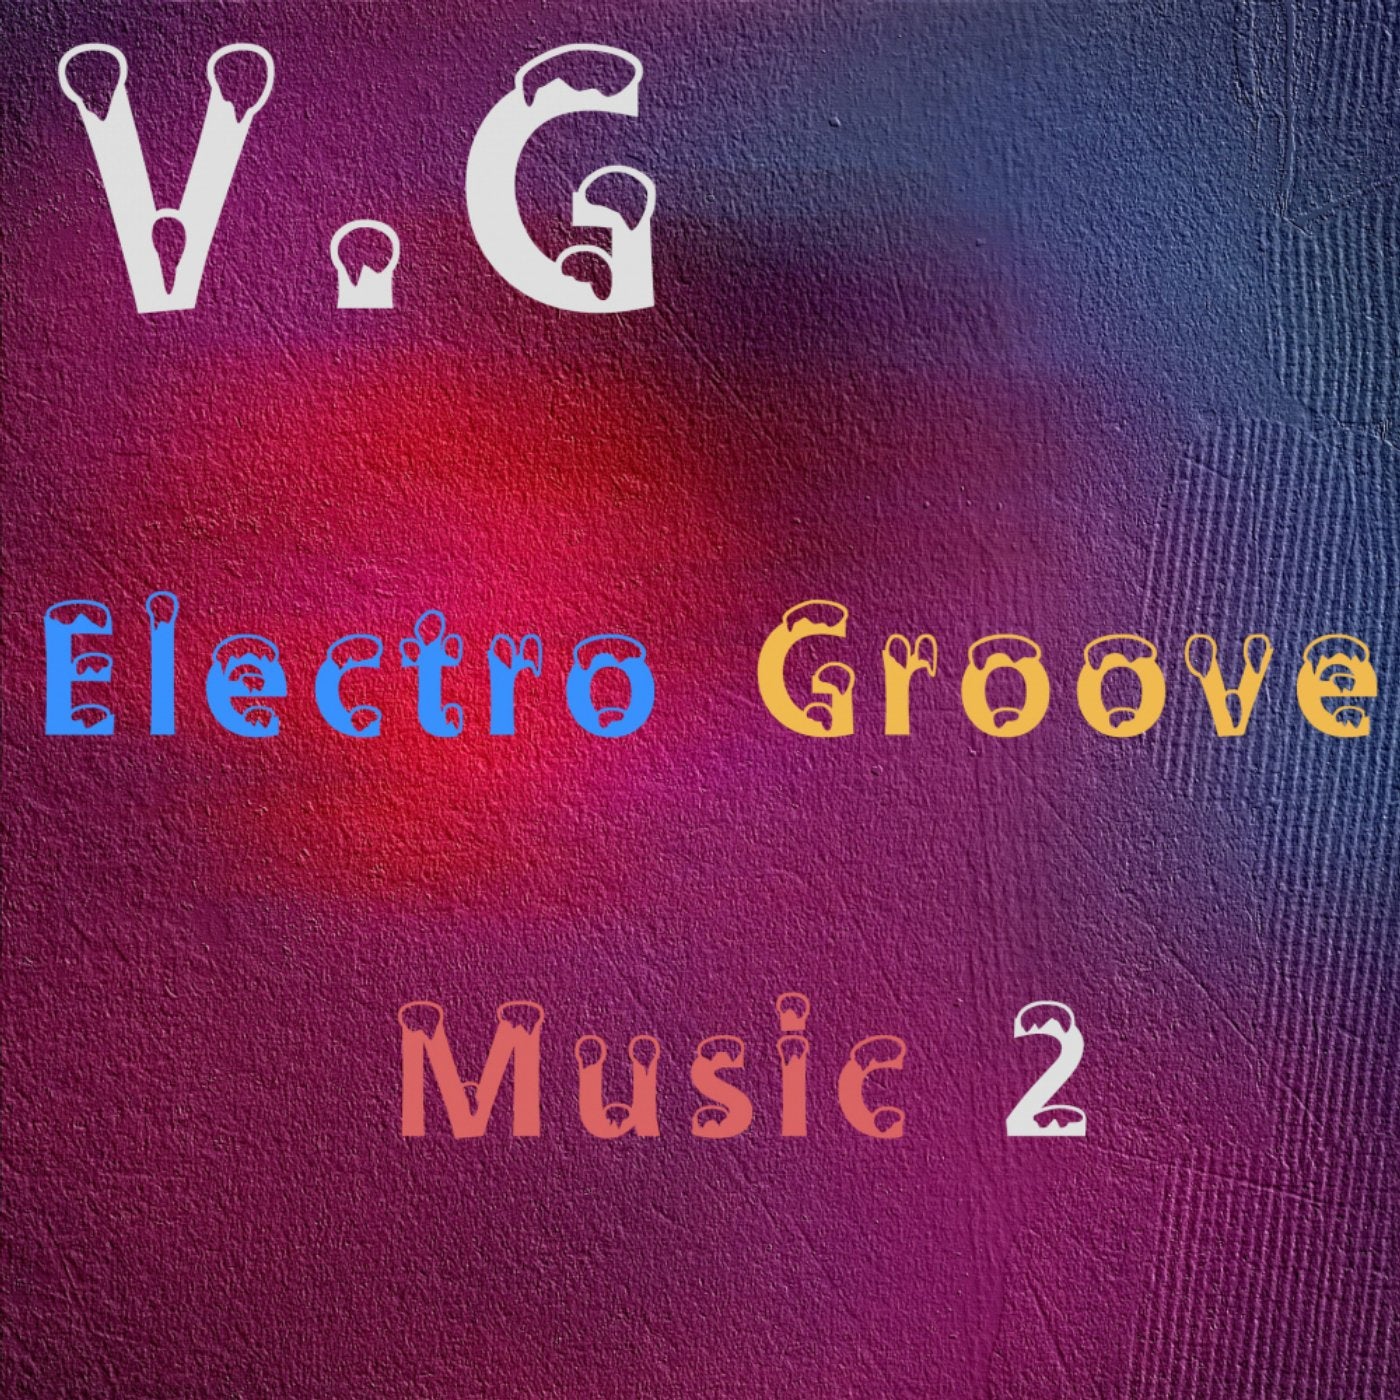 Electro Groove Music 2